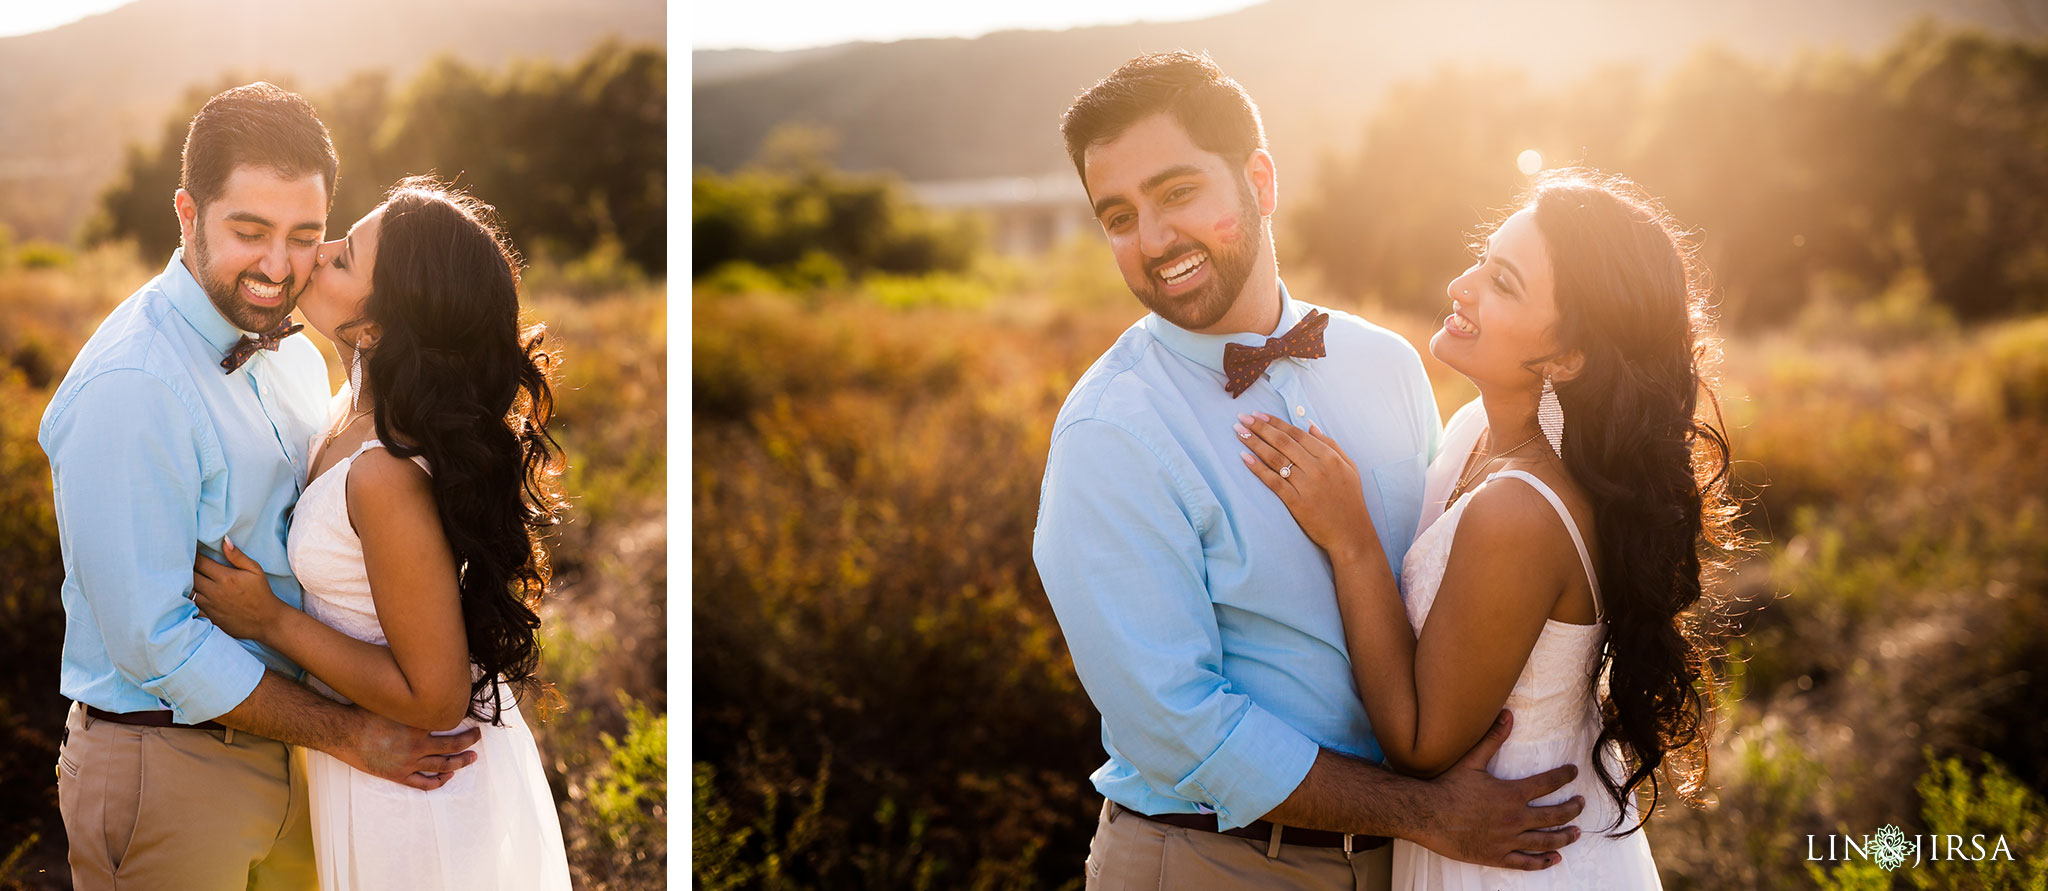 12 james dilley preserve orange county engagement photography